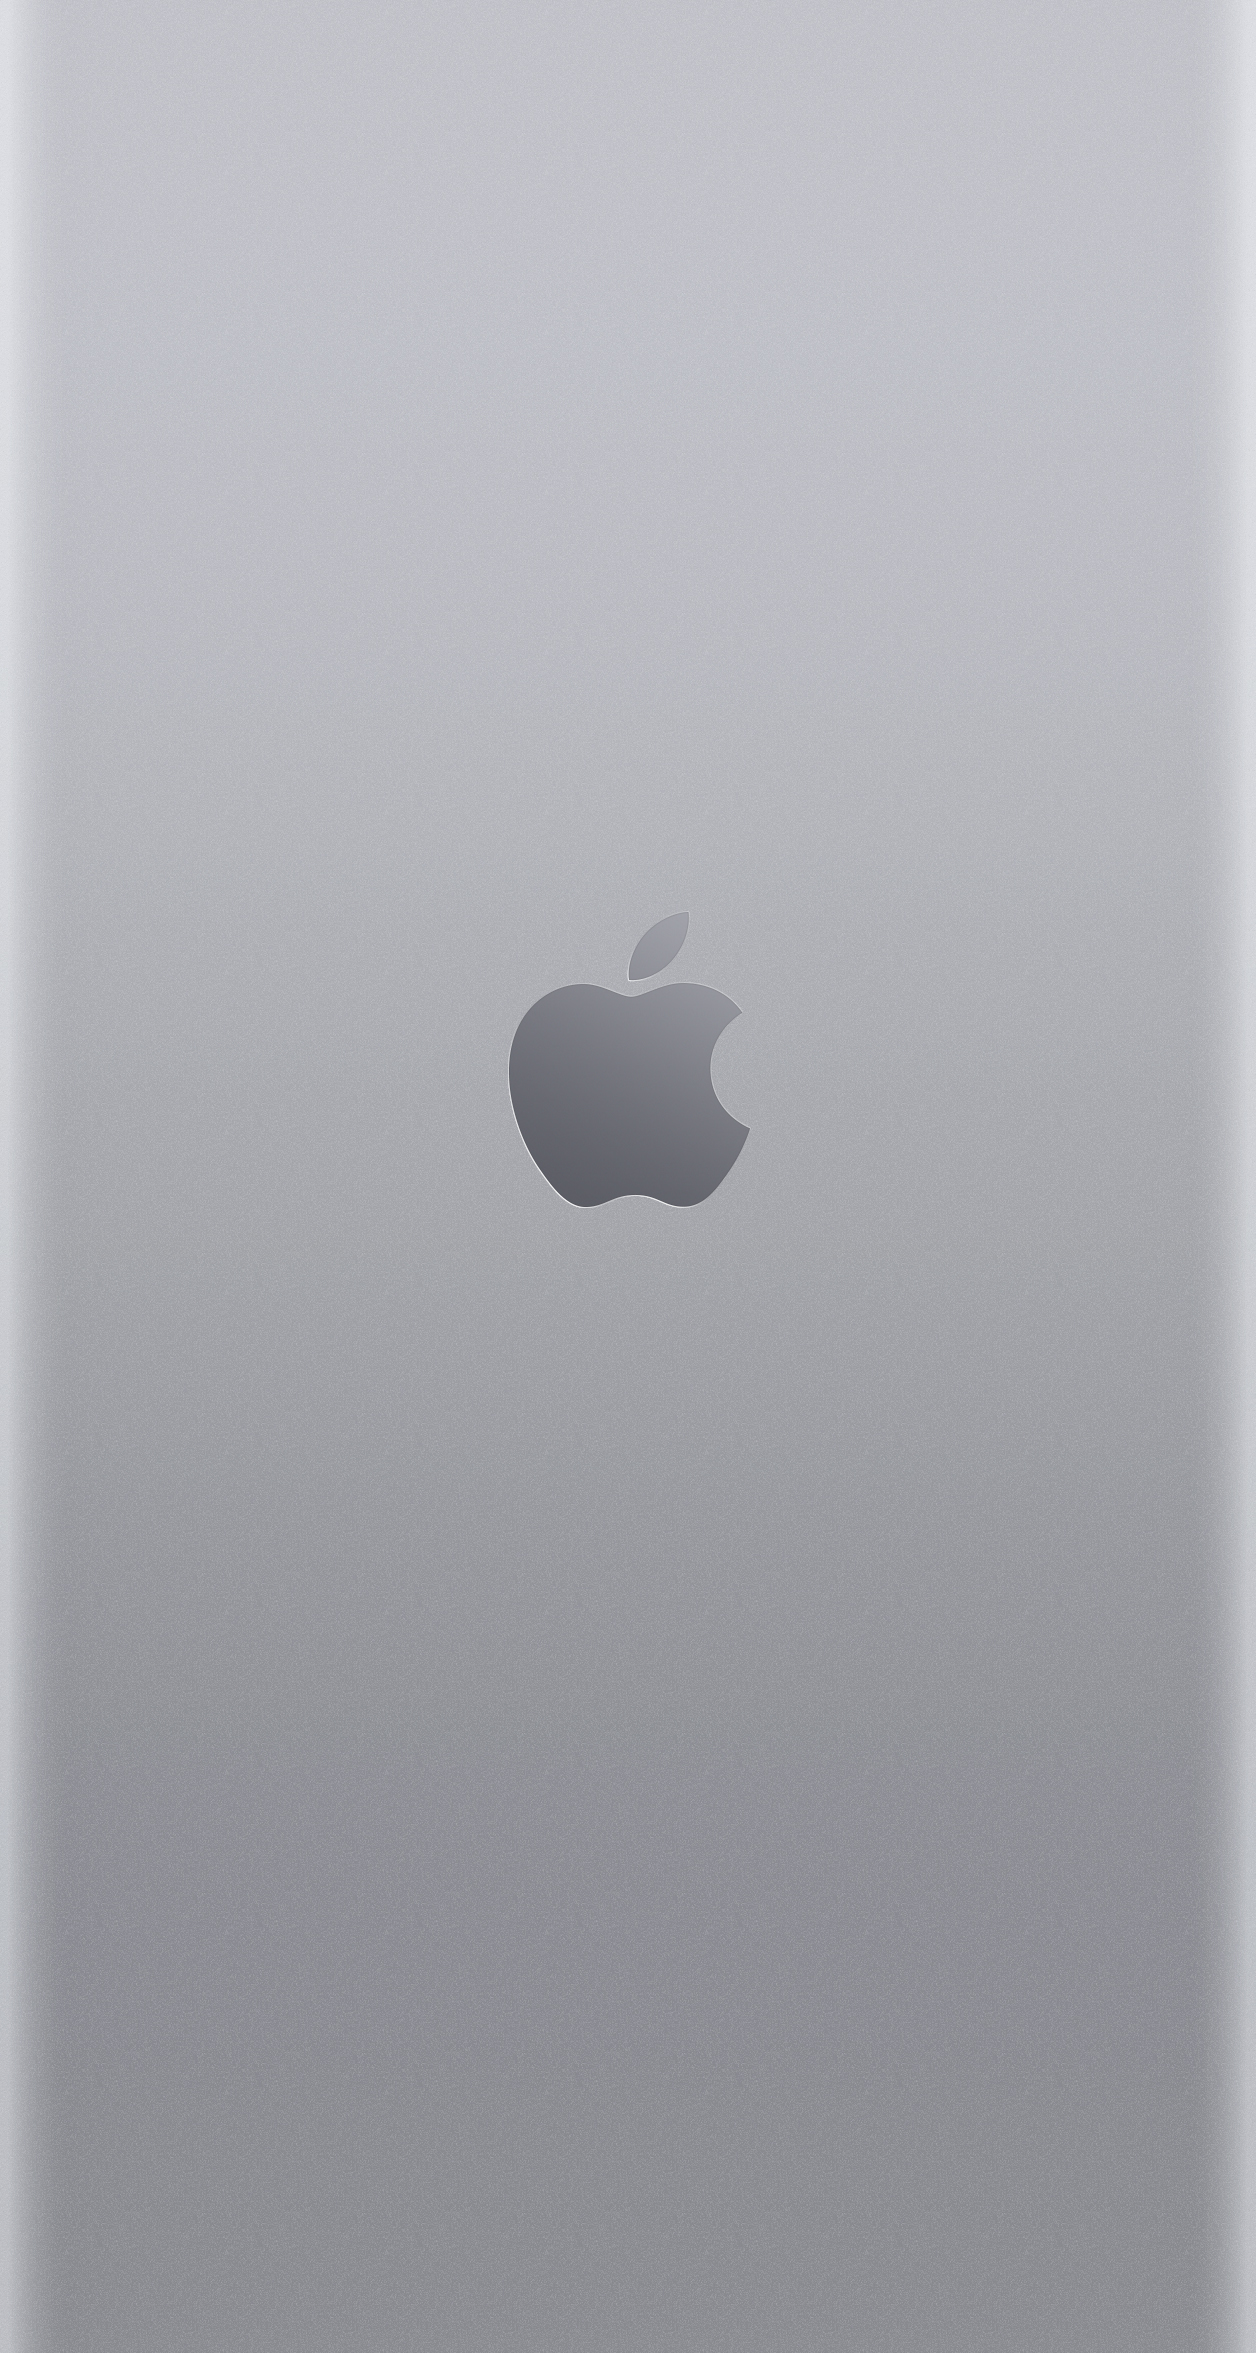 iphone 6 plus wallpaper,white,ipad,technology,apple,electronic device